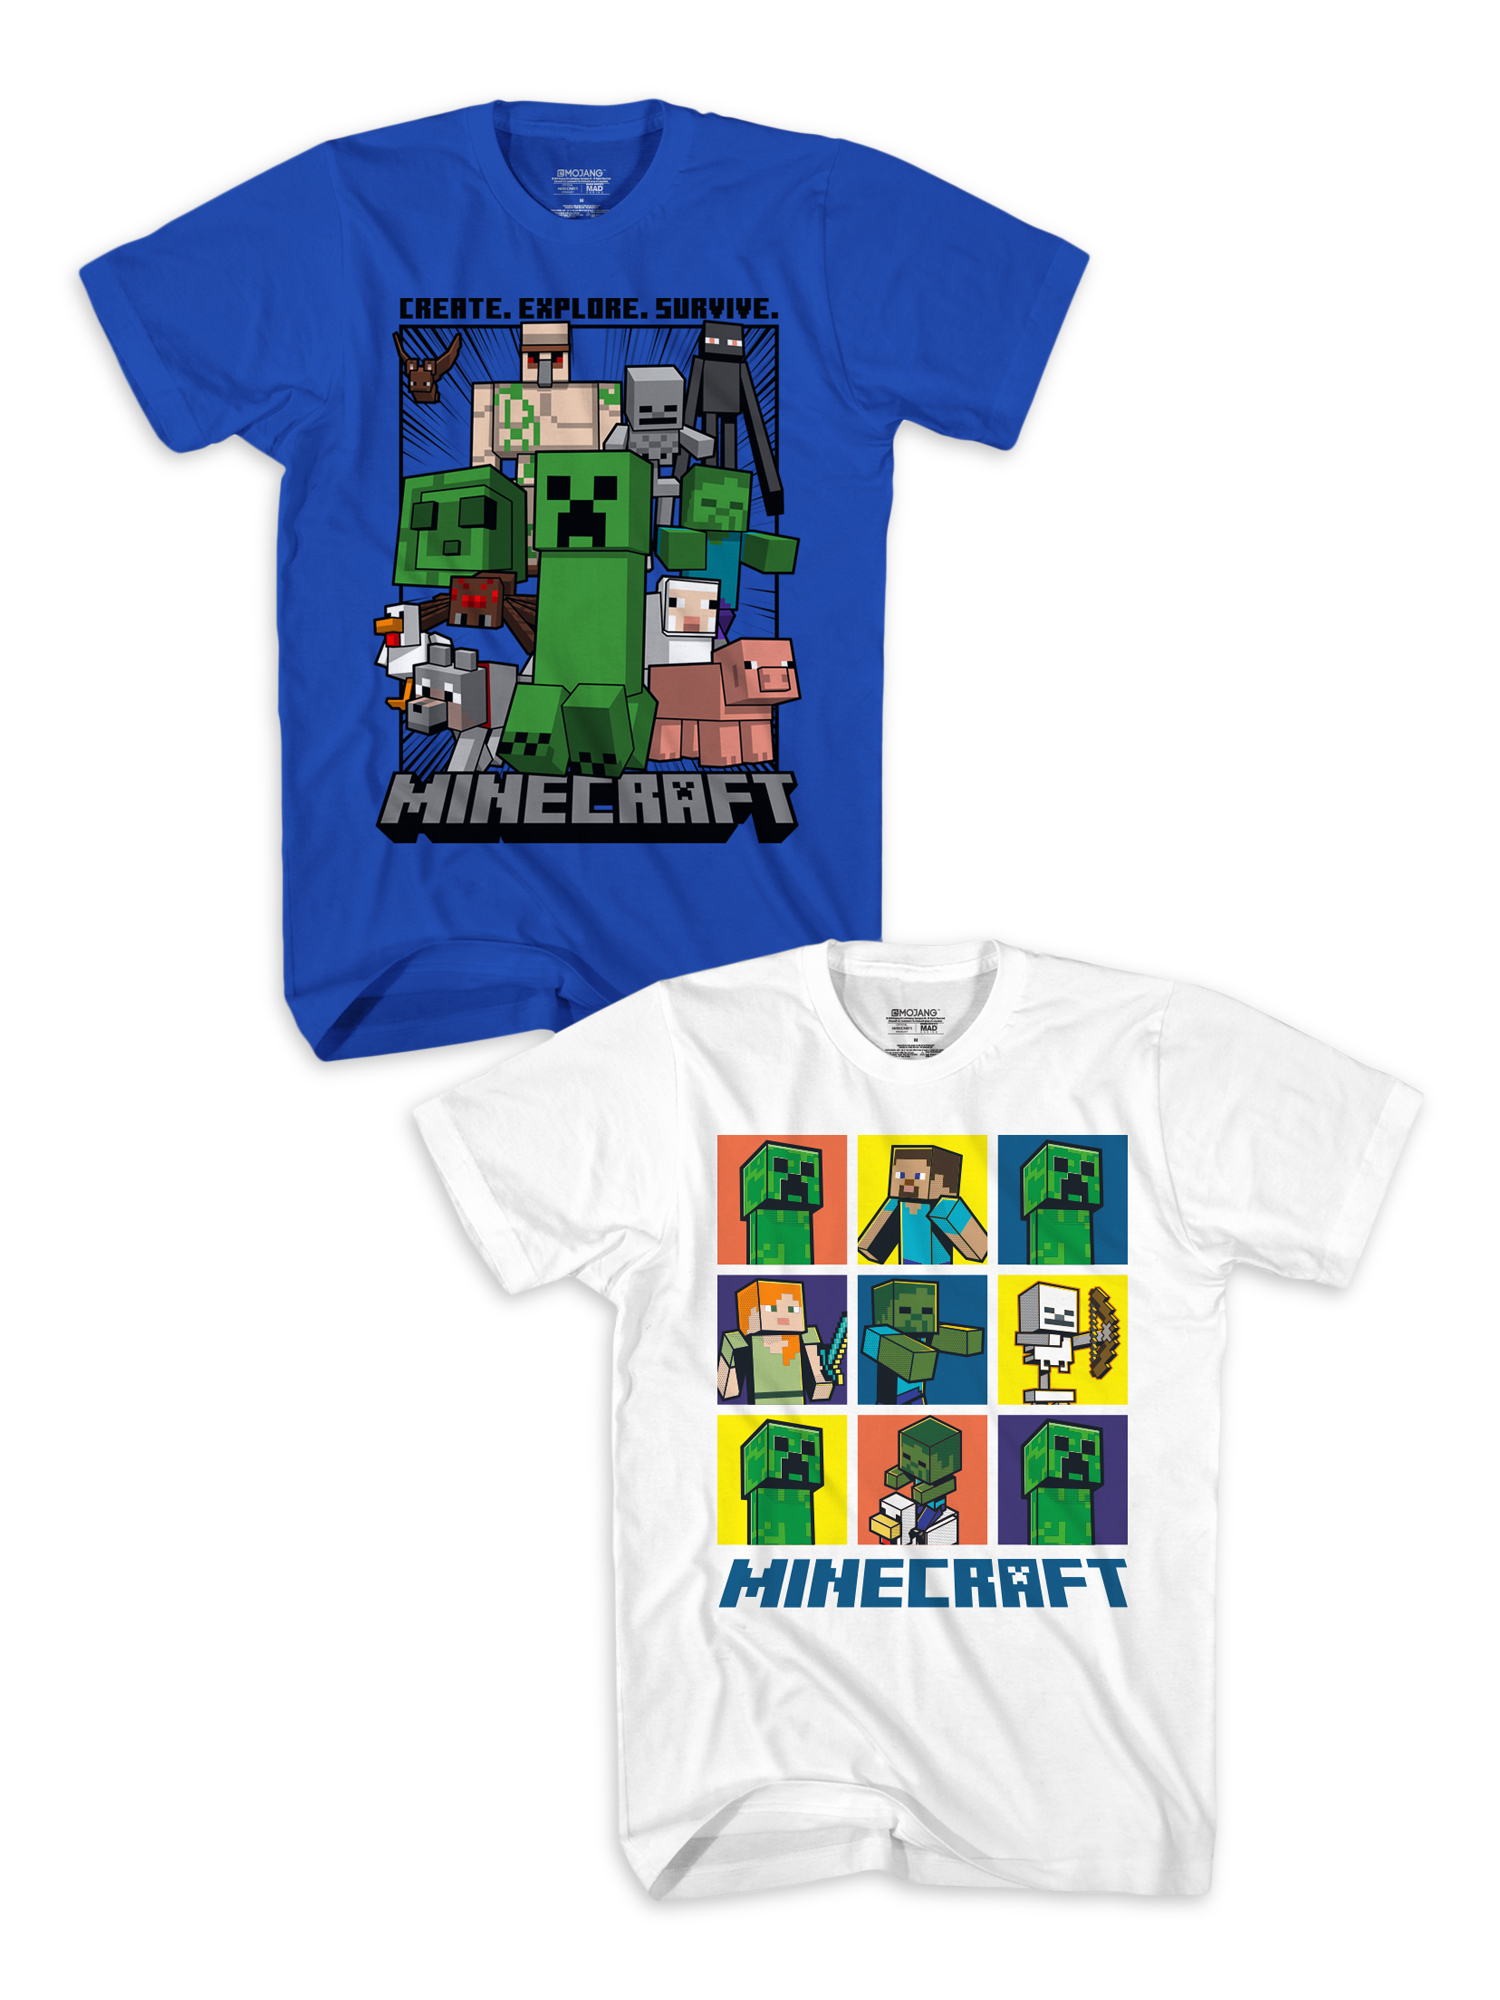 Minecraft Short Sleeve Graphic Crew Neck Relaxed Fit T-Shirt (Little Boys or Big Boys) 2 Pack - image 1 of 4